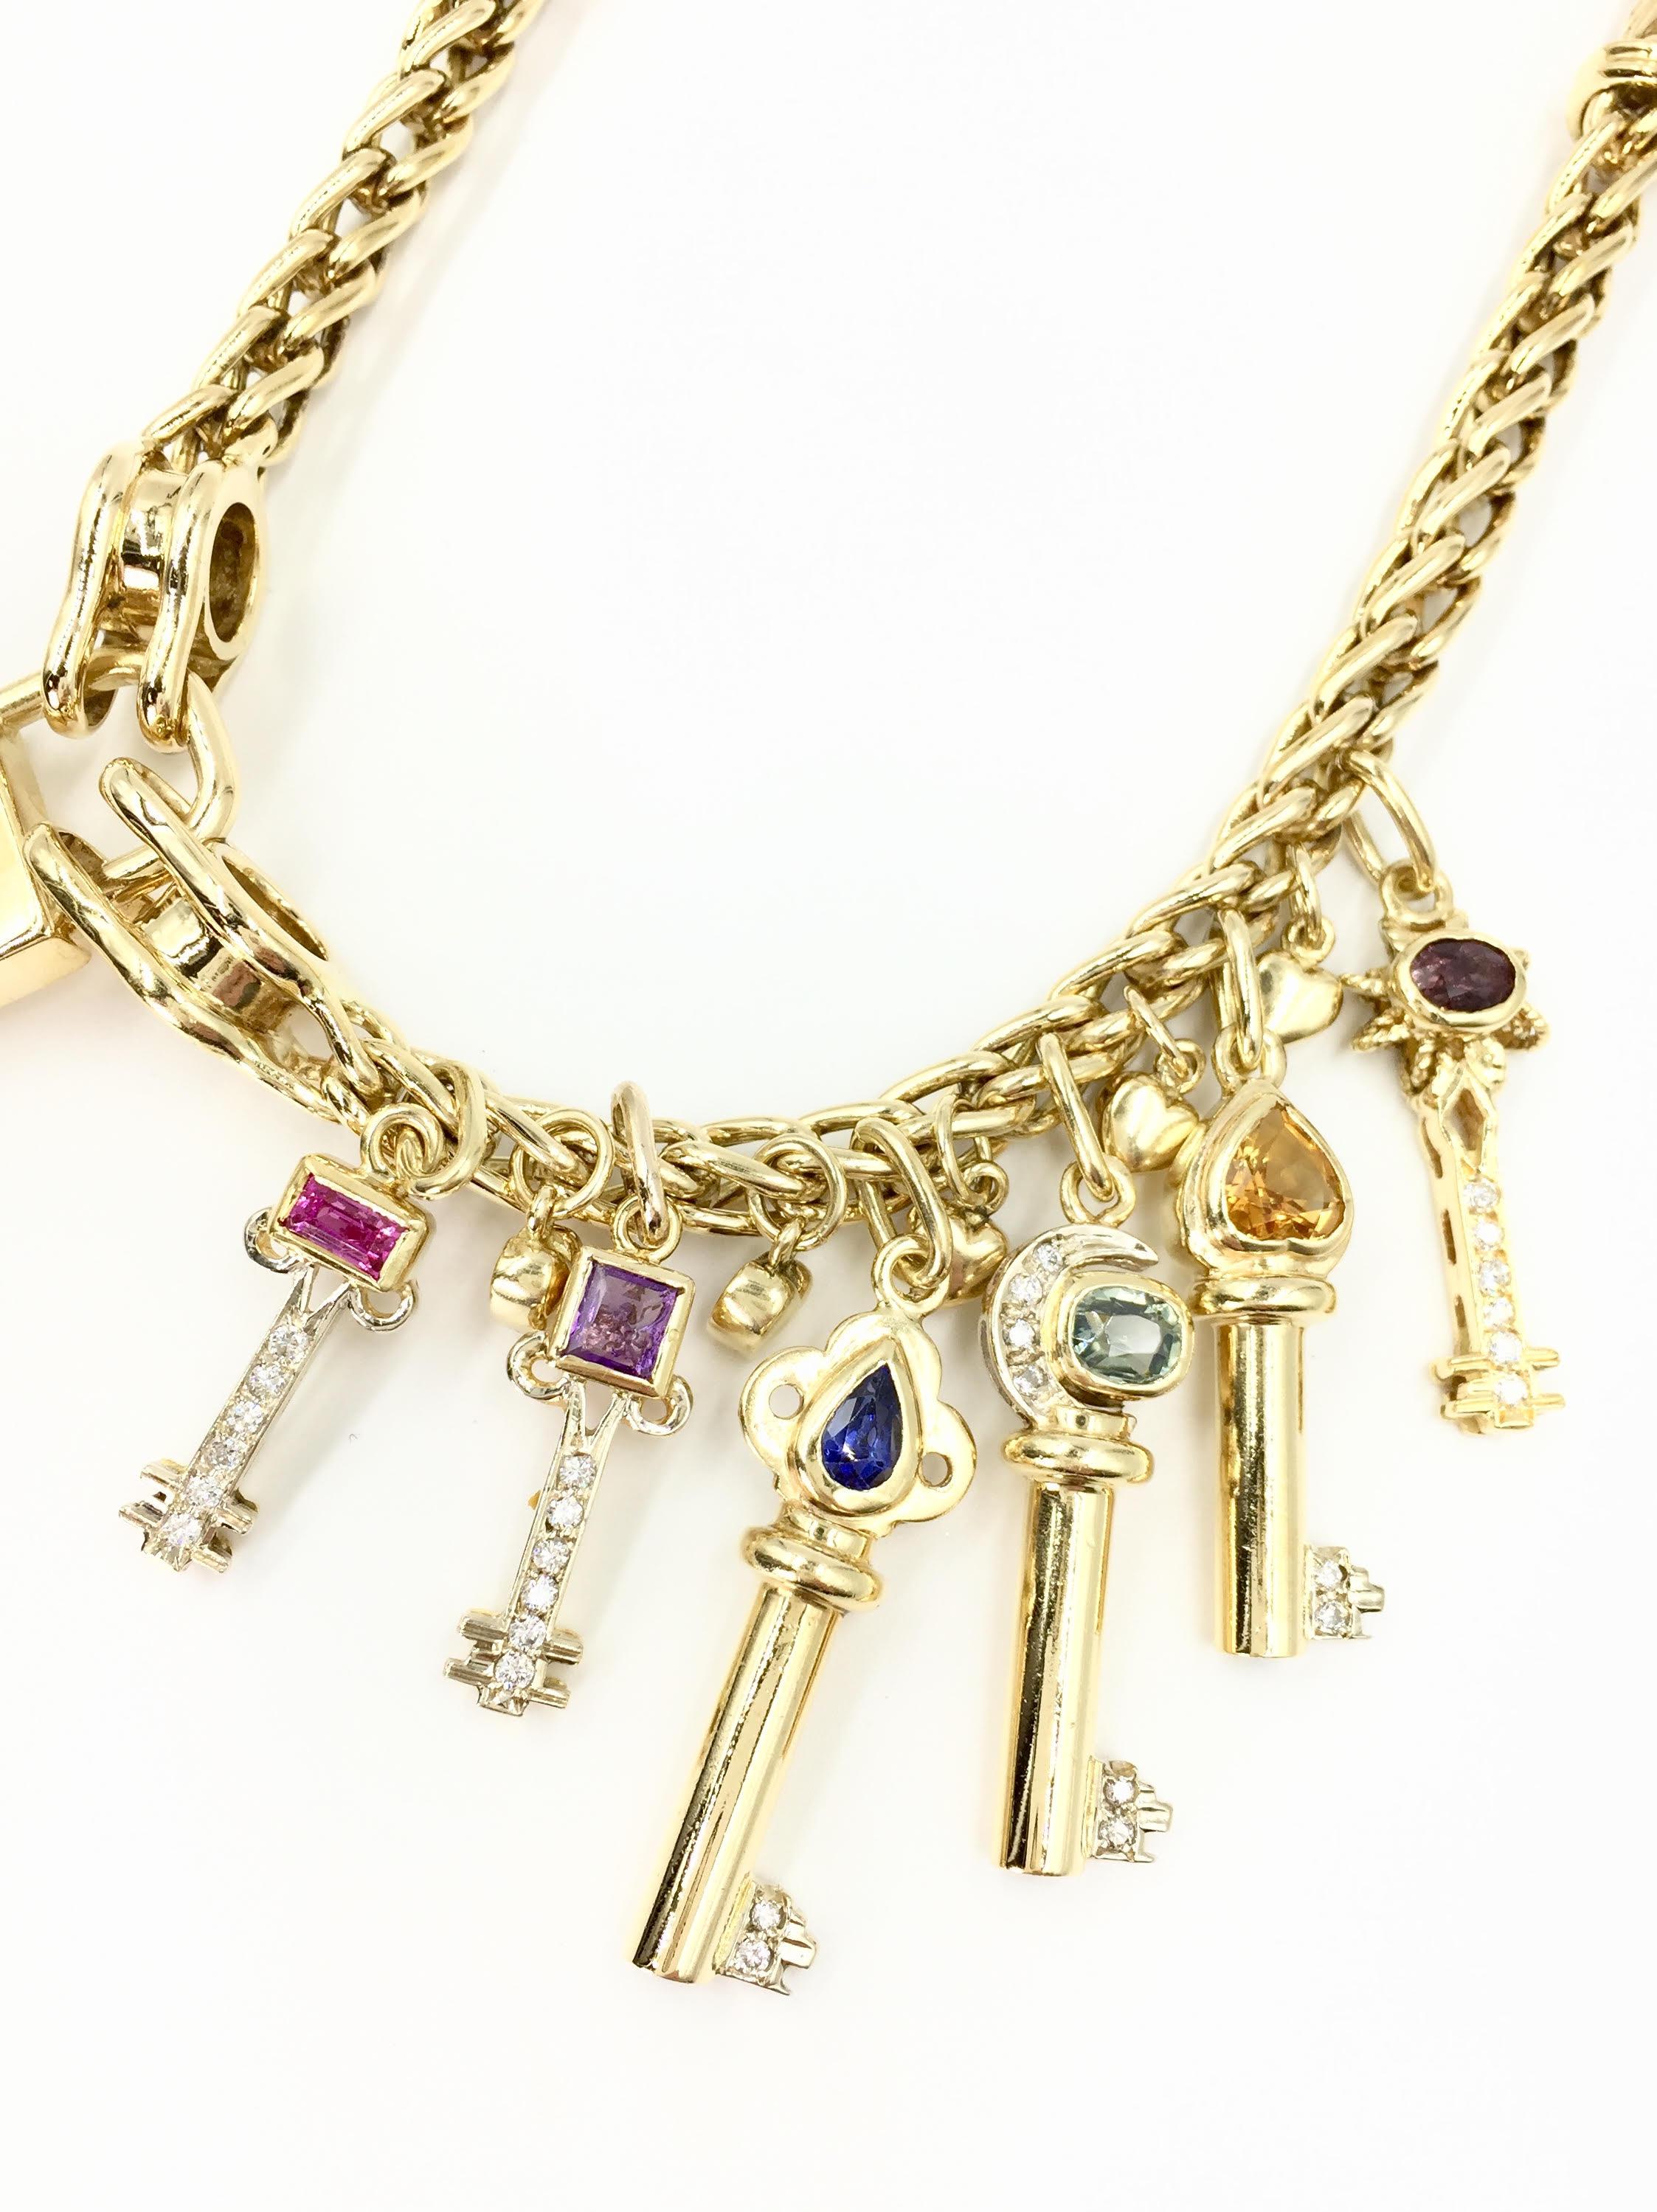 Heavy and substantial this vintage 18 karat yellow gold charm necklace features a golden padlock and 6 dangling diamond and semi-precious gemstone keys. Each key has a different gemstone set at the top including light and dark blue topaz, amethyst,